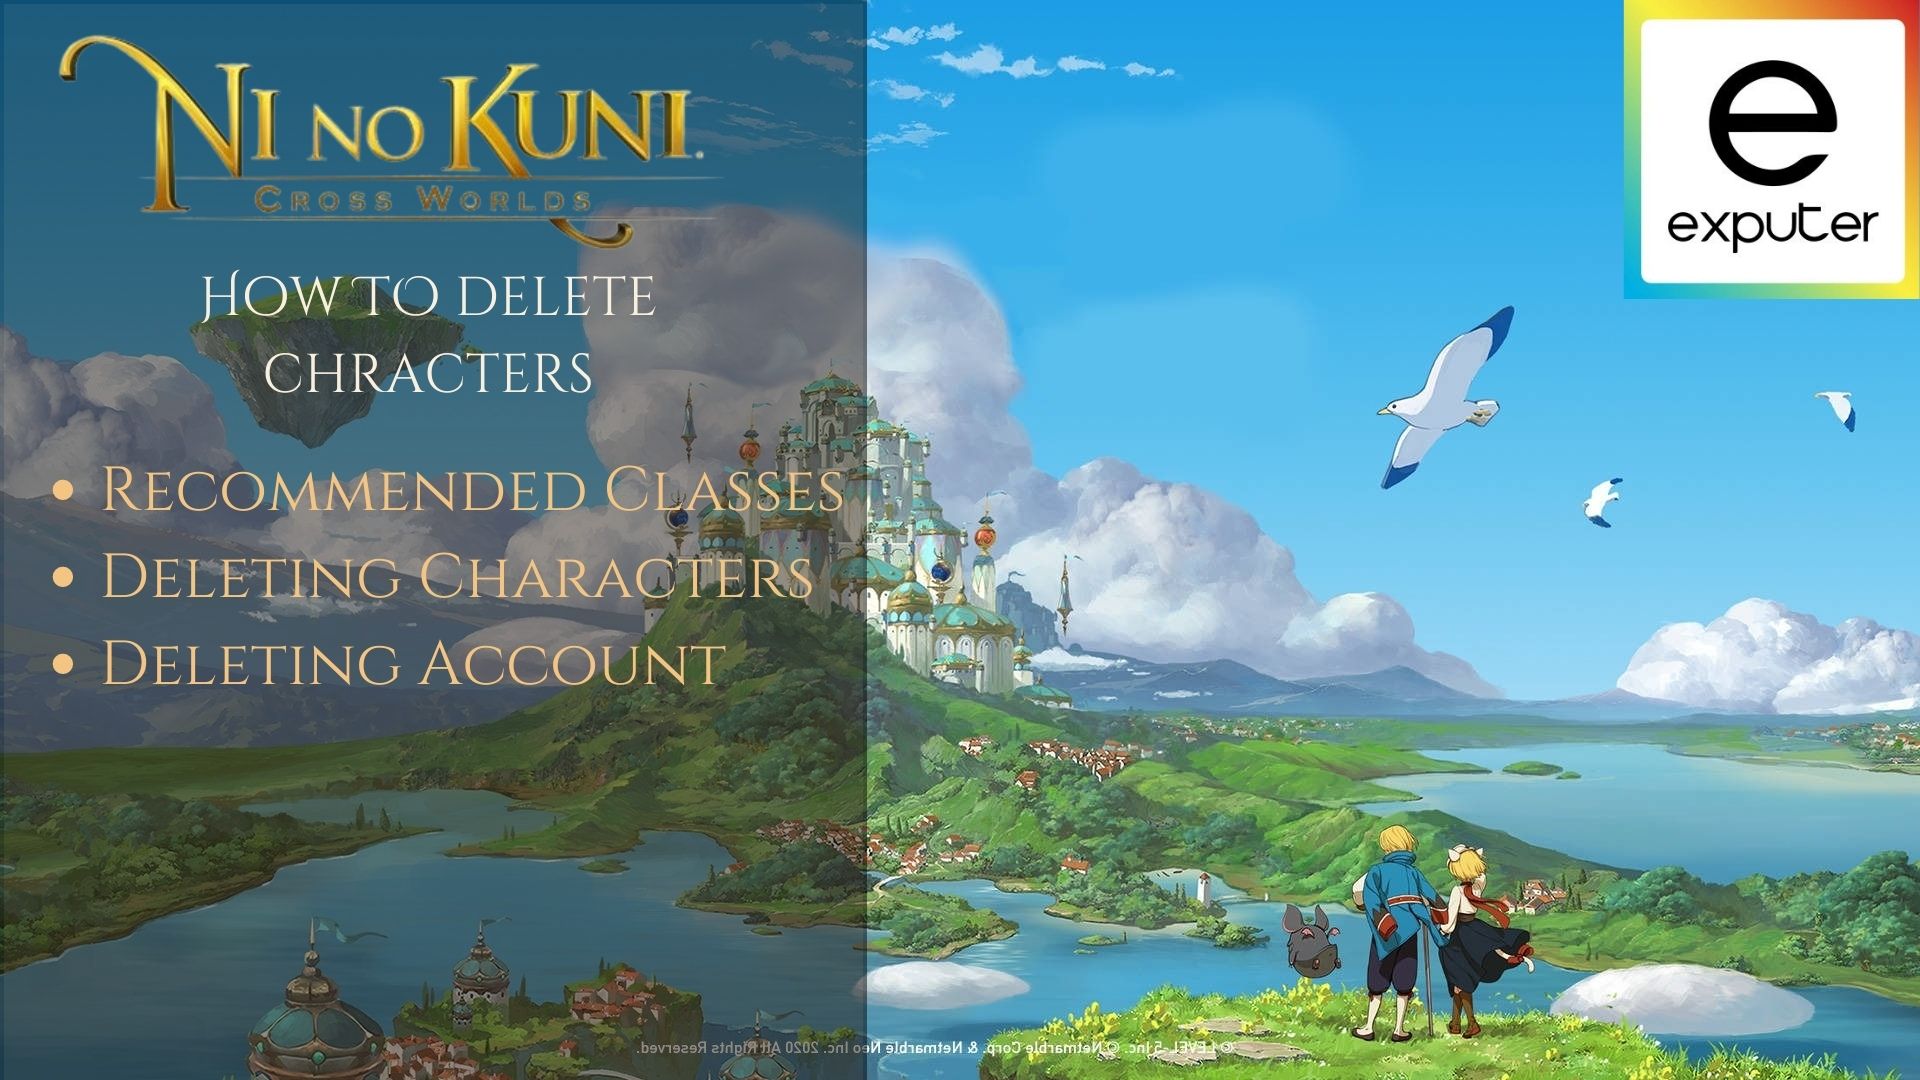 Guide on deleting your characters in Ni No Kuni:Cross Worlds